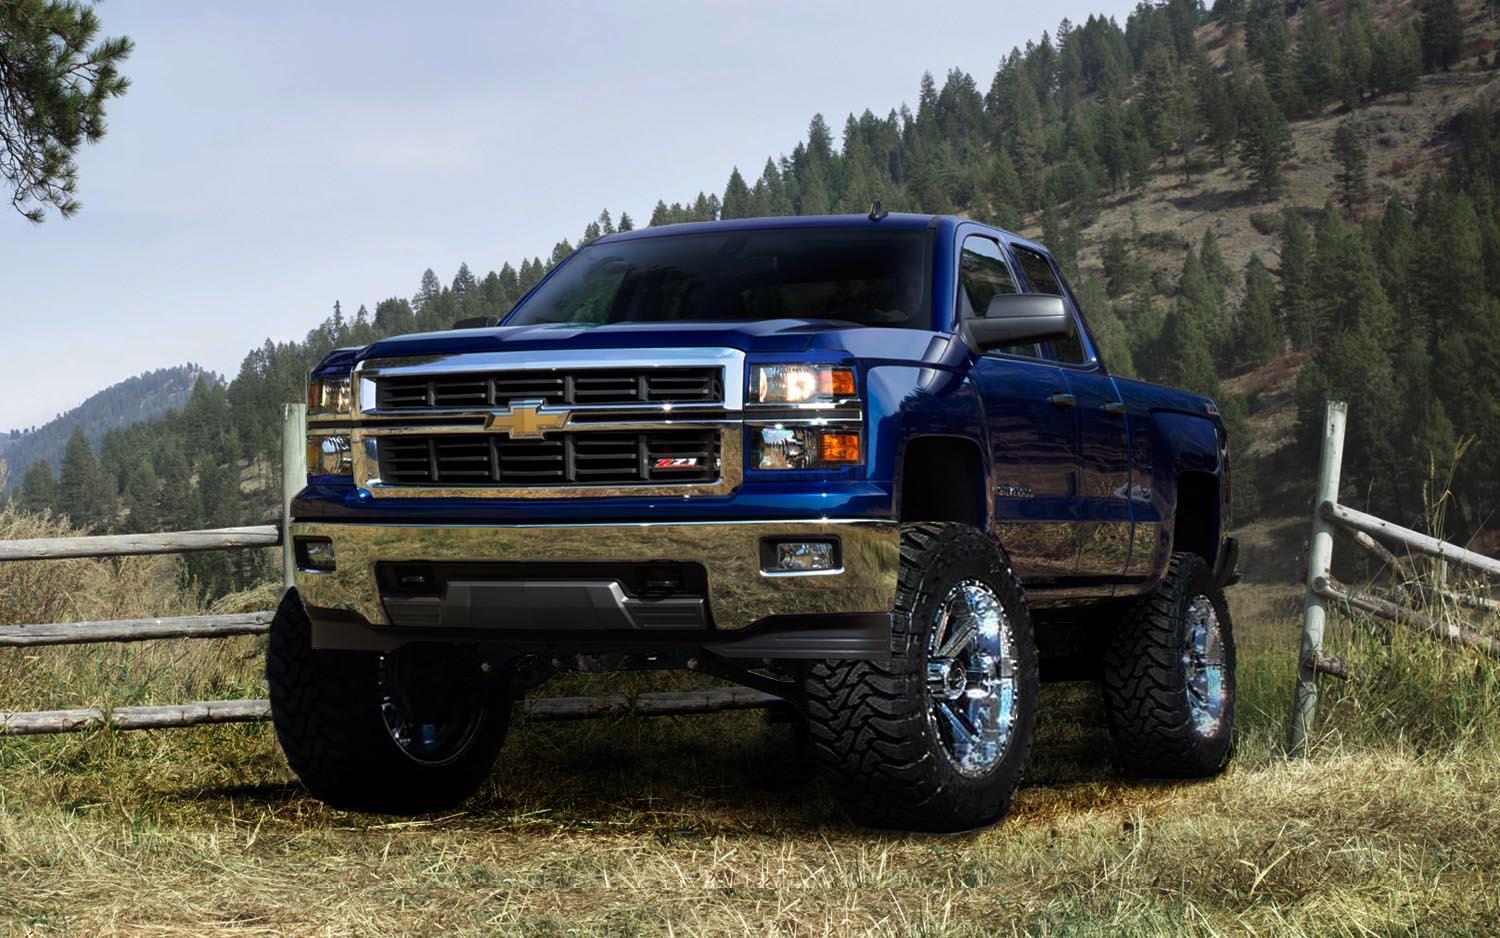 Chevy Truck Wallpapers